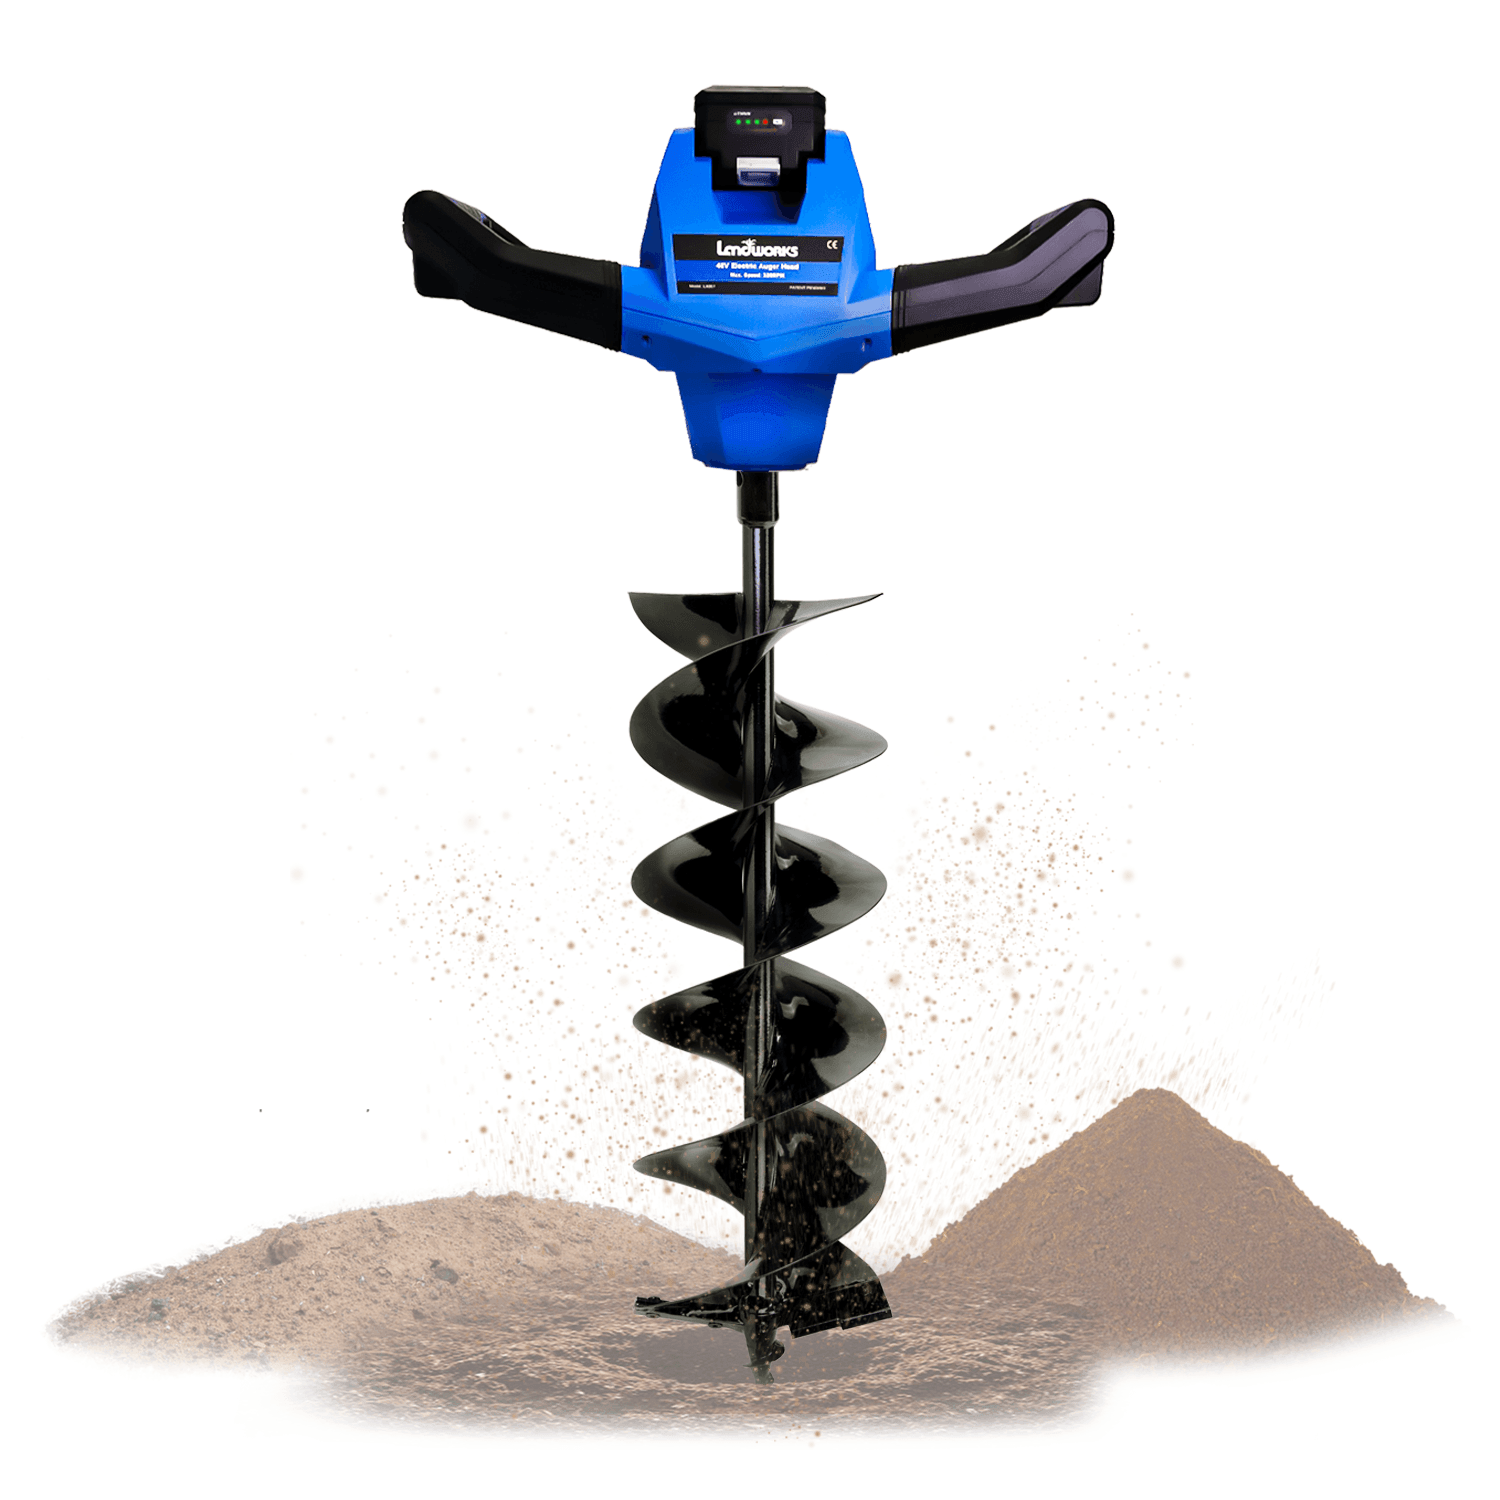 Landworks Electric Earth Auger and Drill Bit - 48V 2Ah Battery System, 6" x 30" Drill Bit, 3/4" Shaft - DIY Tools by GreatCircleUS